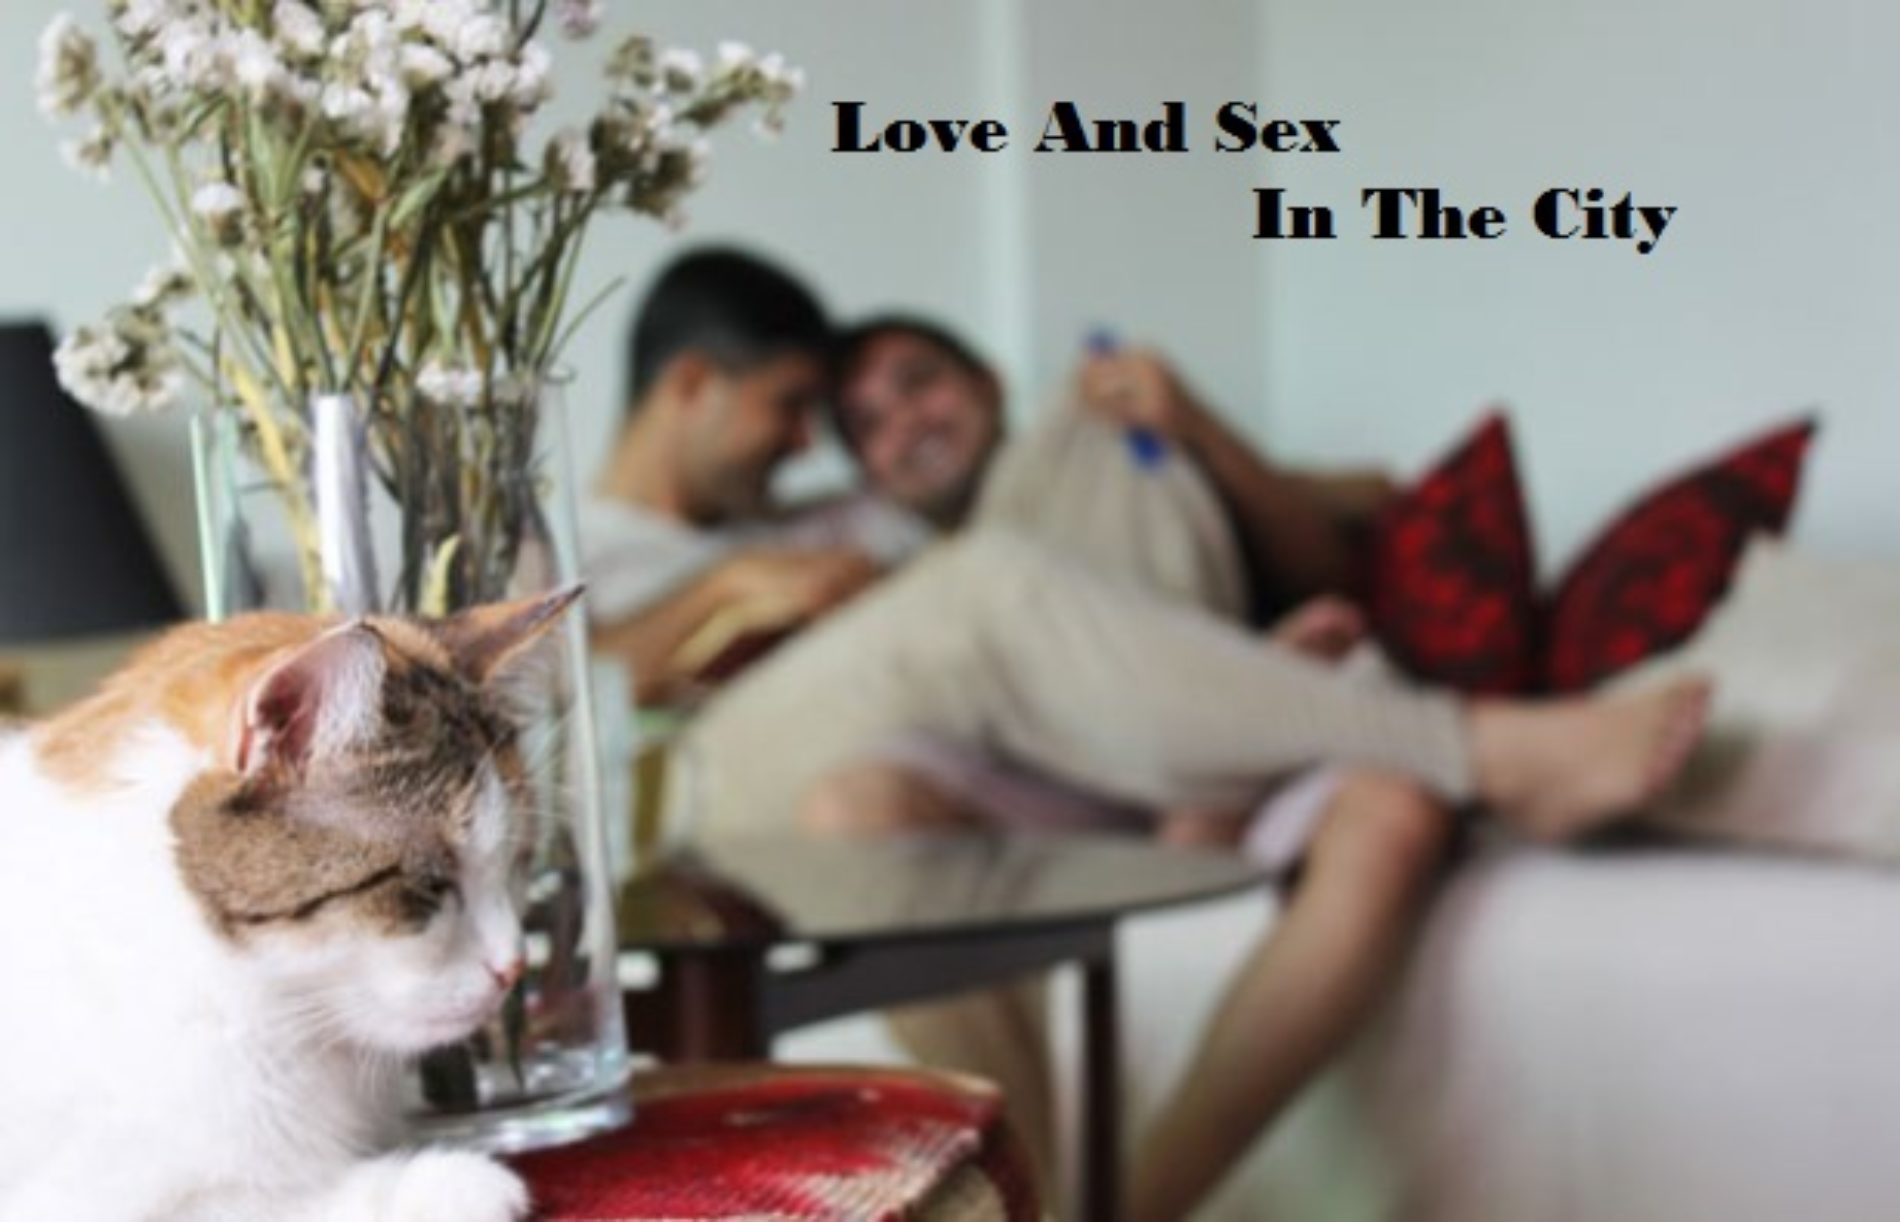 LOVE AND SEX IN THE CITY (Episode 39)